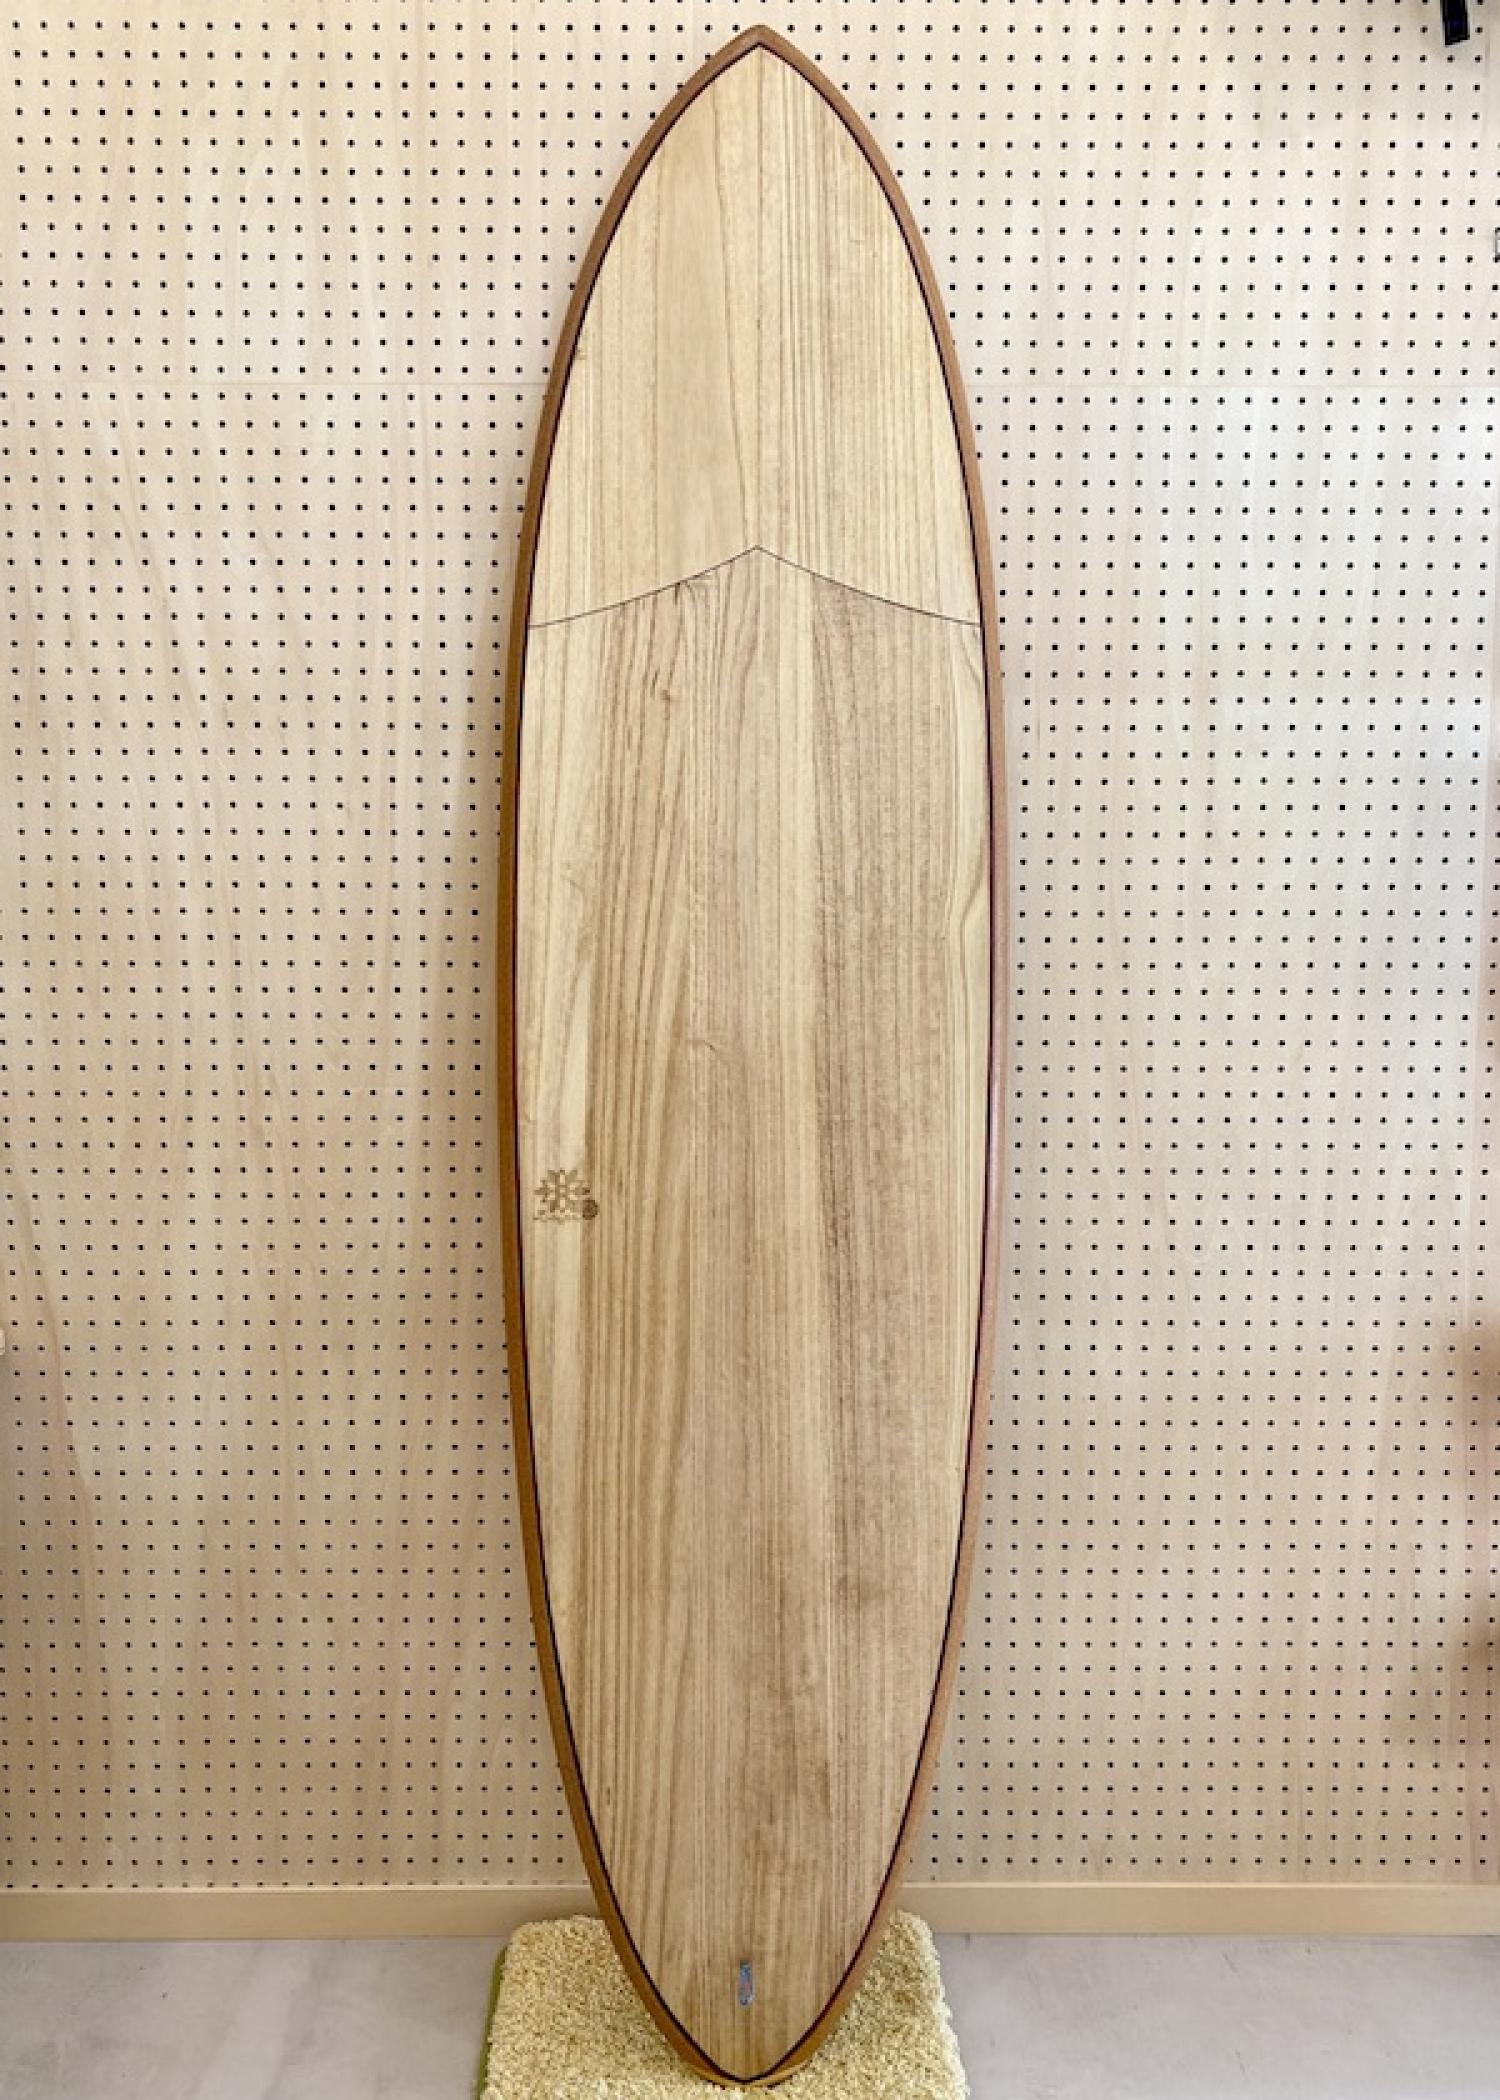 USED (Rice Ball 7.2 LASCA WOODWORKS)